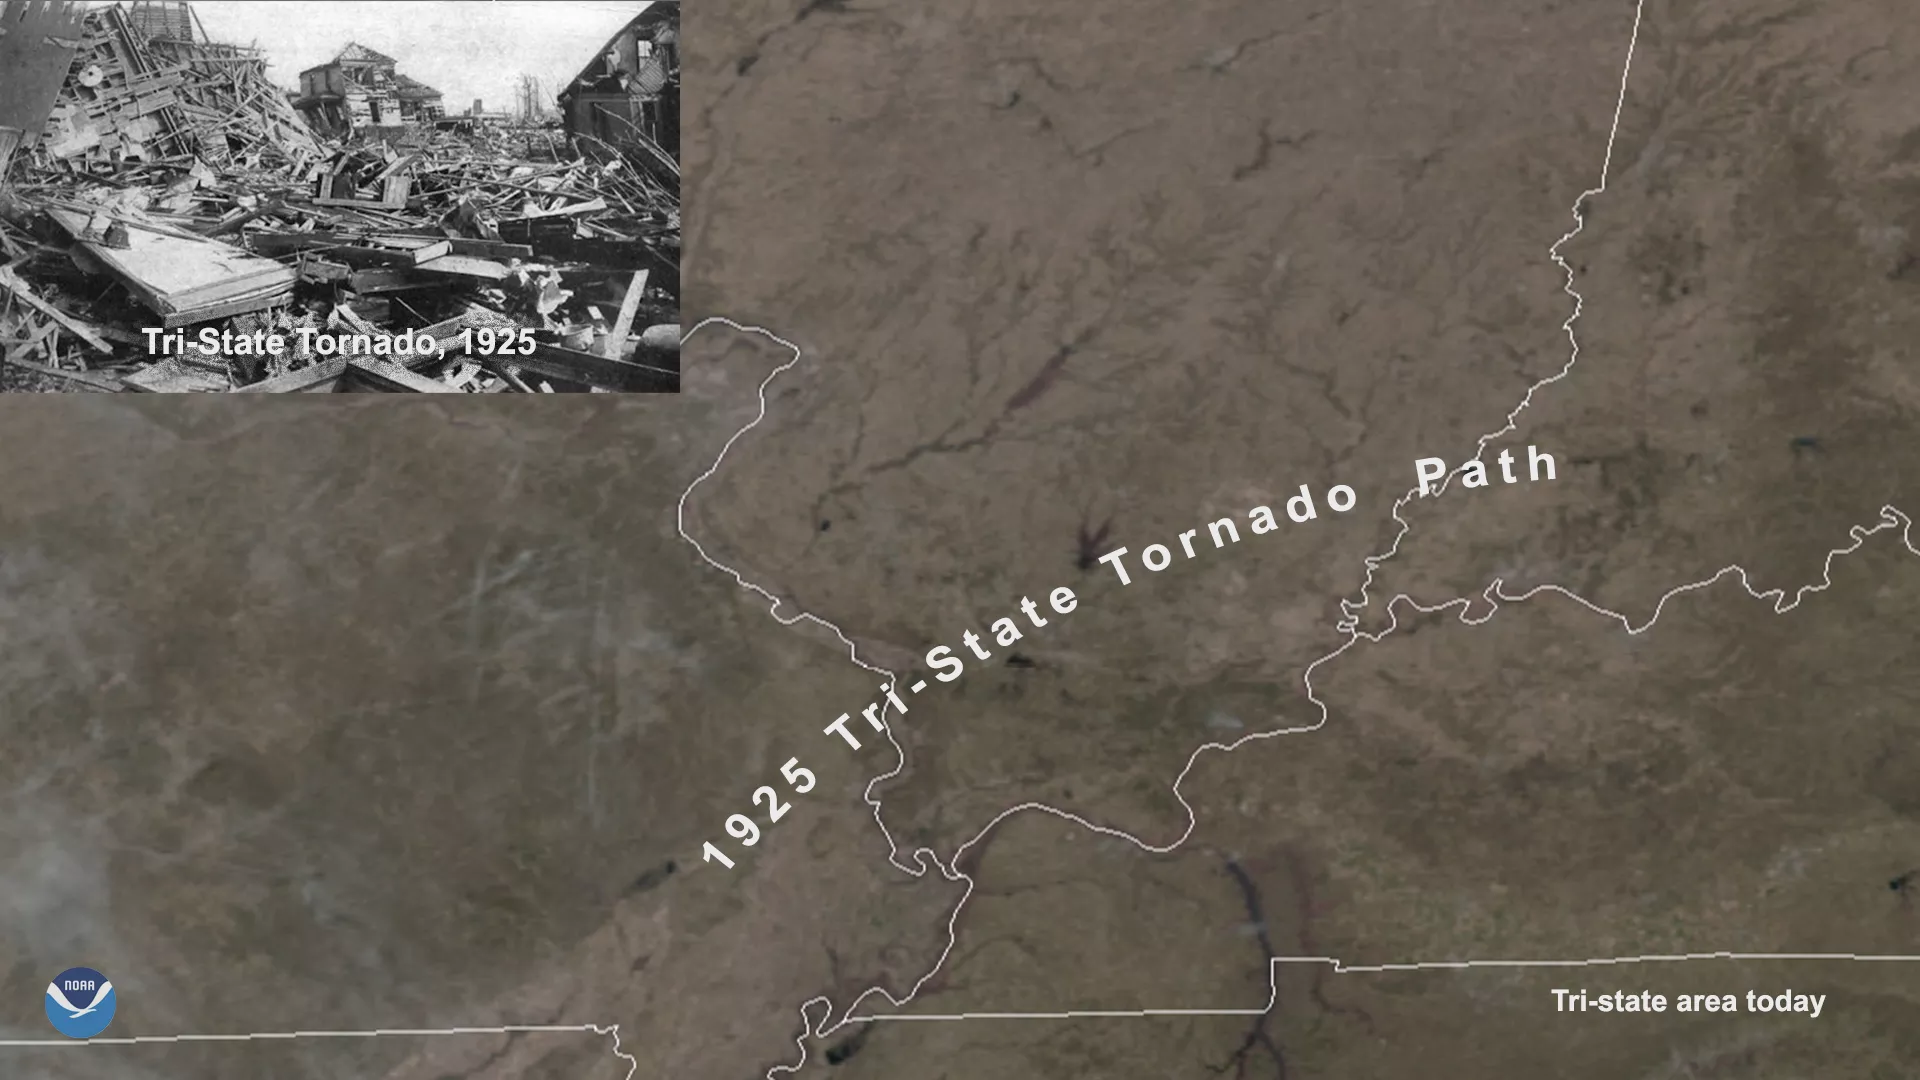 Track of the Tri-State Tornado from 95 years ago, compared with GeoColor imagery of area today. Inset of TriState Tornado damage from historical photo. 